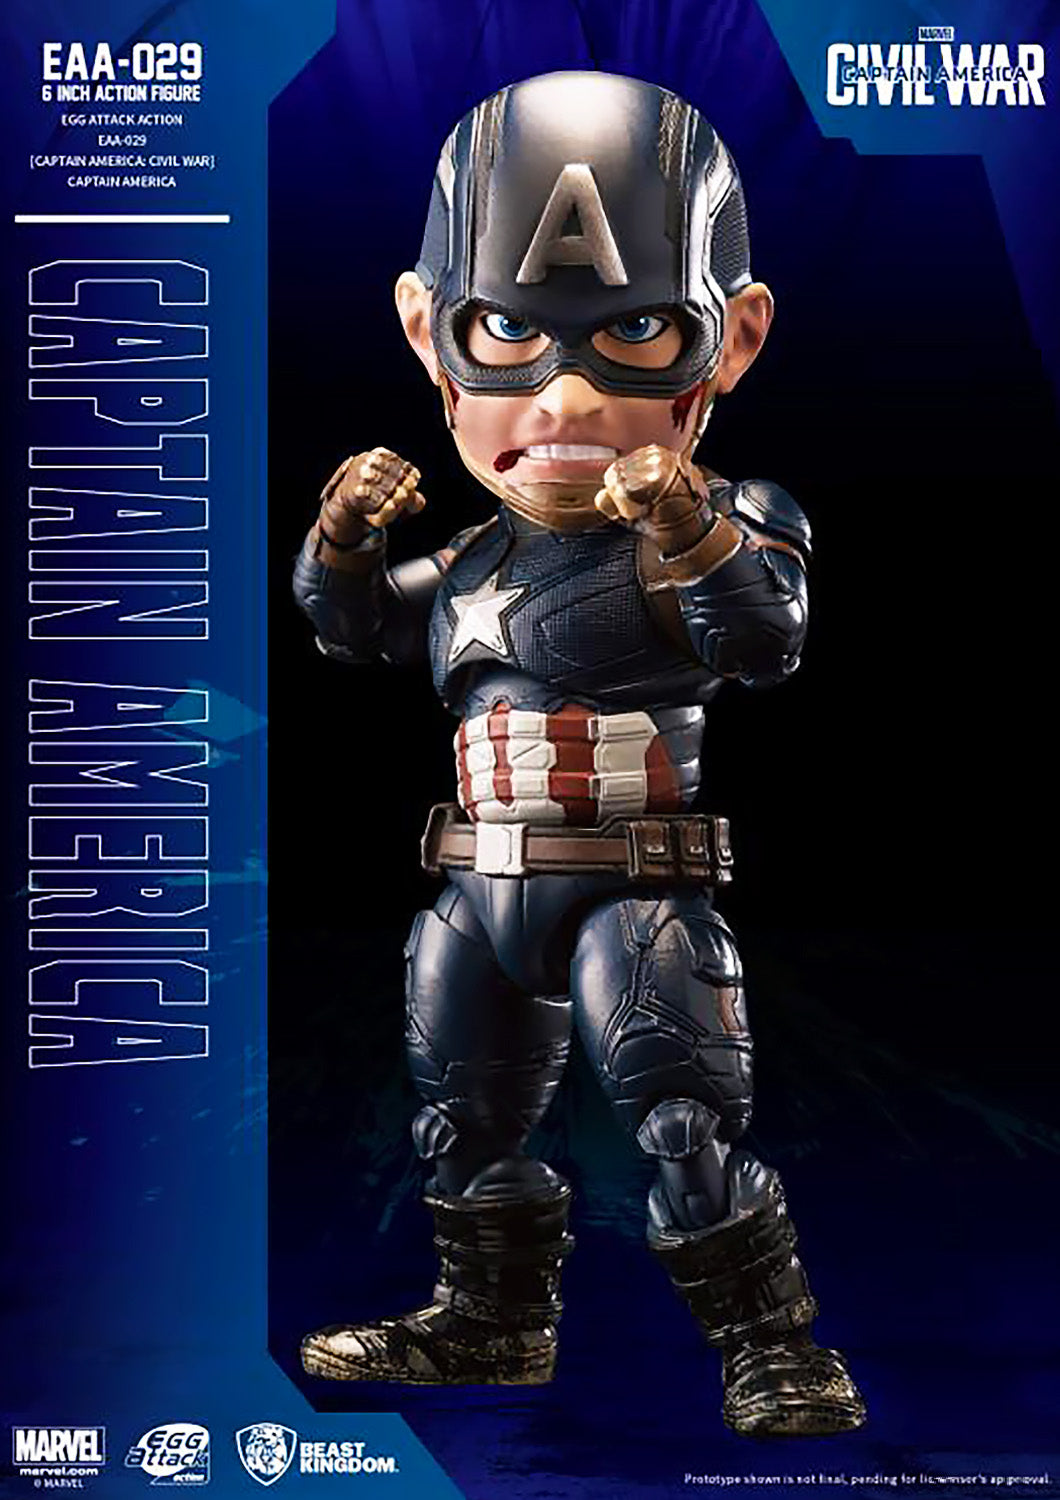 BEAST KINGDOM CIVIL WAR EGG ATTACK ACTION CAPTAIN AMERICA - EAA-029 - Anotoys Collectibles